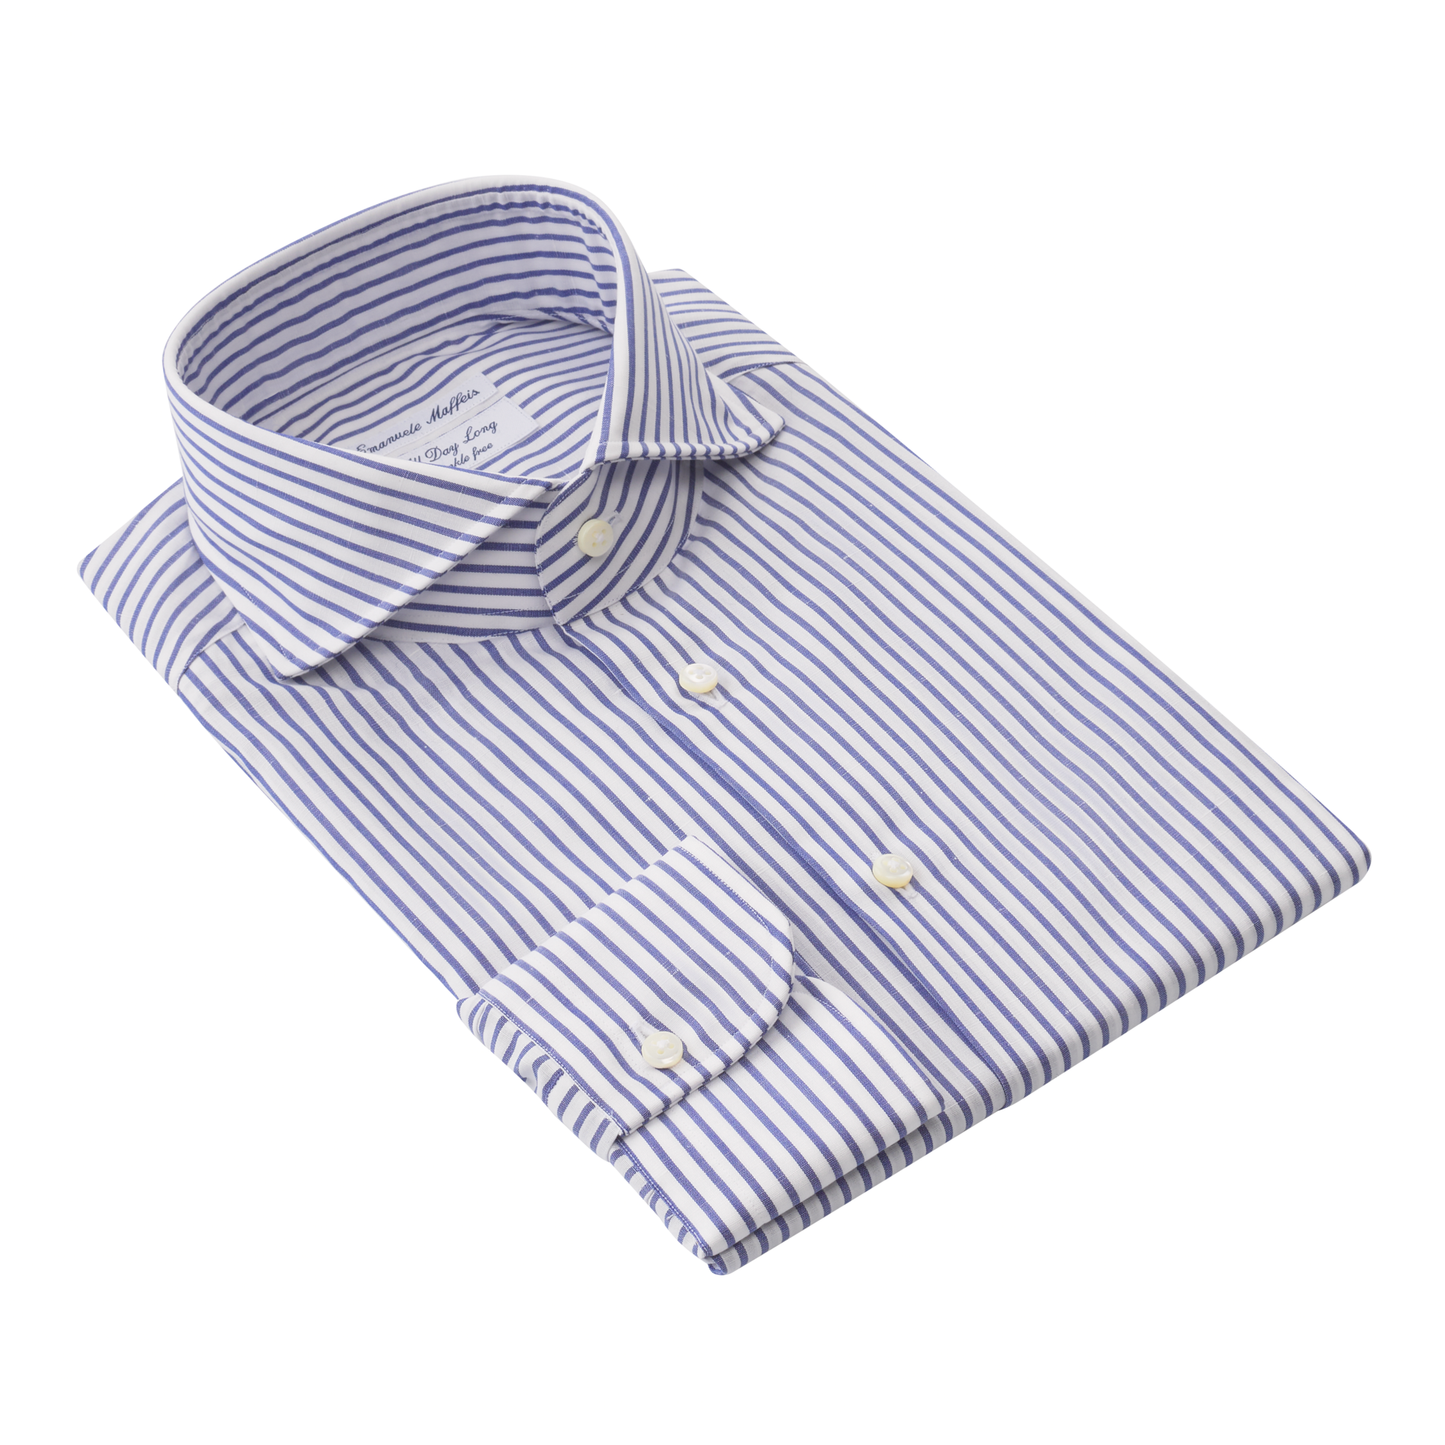 Emanuele Maffeis "All Day Long Collection" Linen and Cotton-Blend Striped Blue Shirt - SARTALE